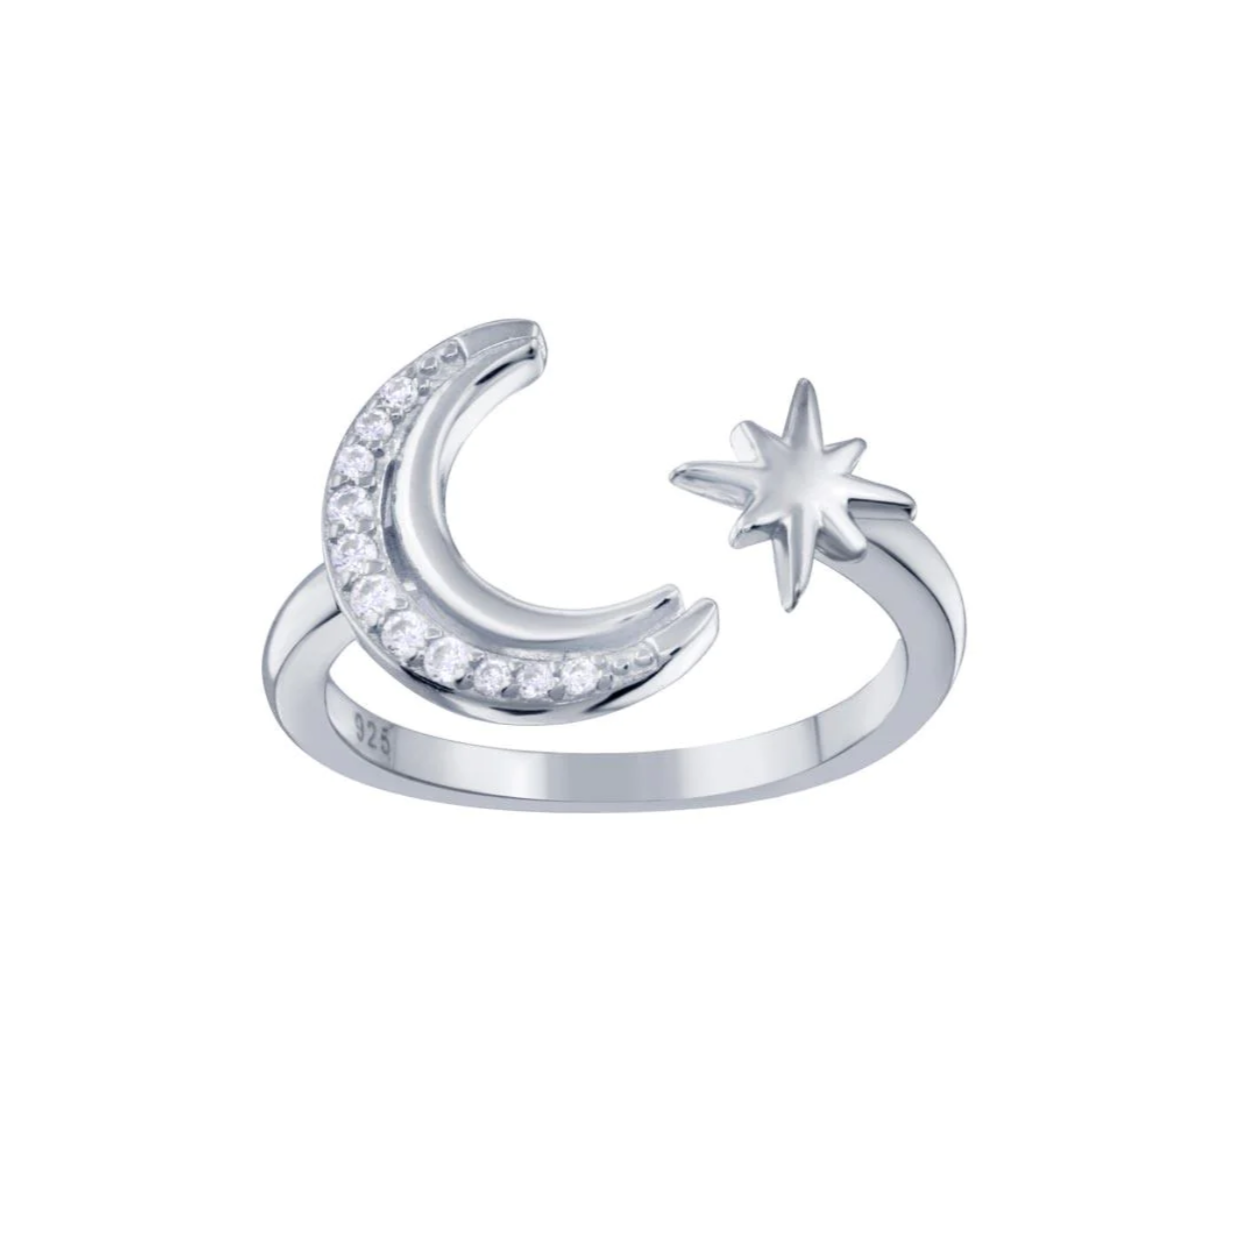 Silver 925 Rhodium Plated Cresent Moon and Star CZ
Ring